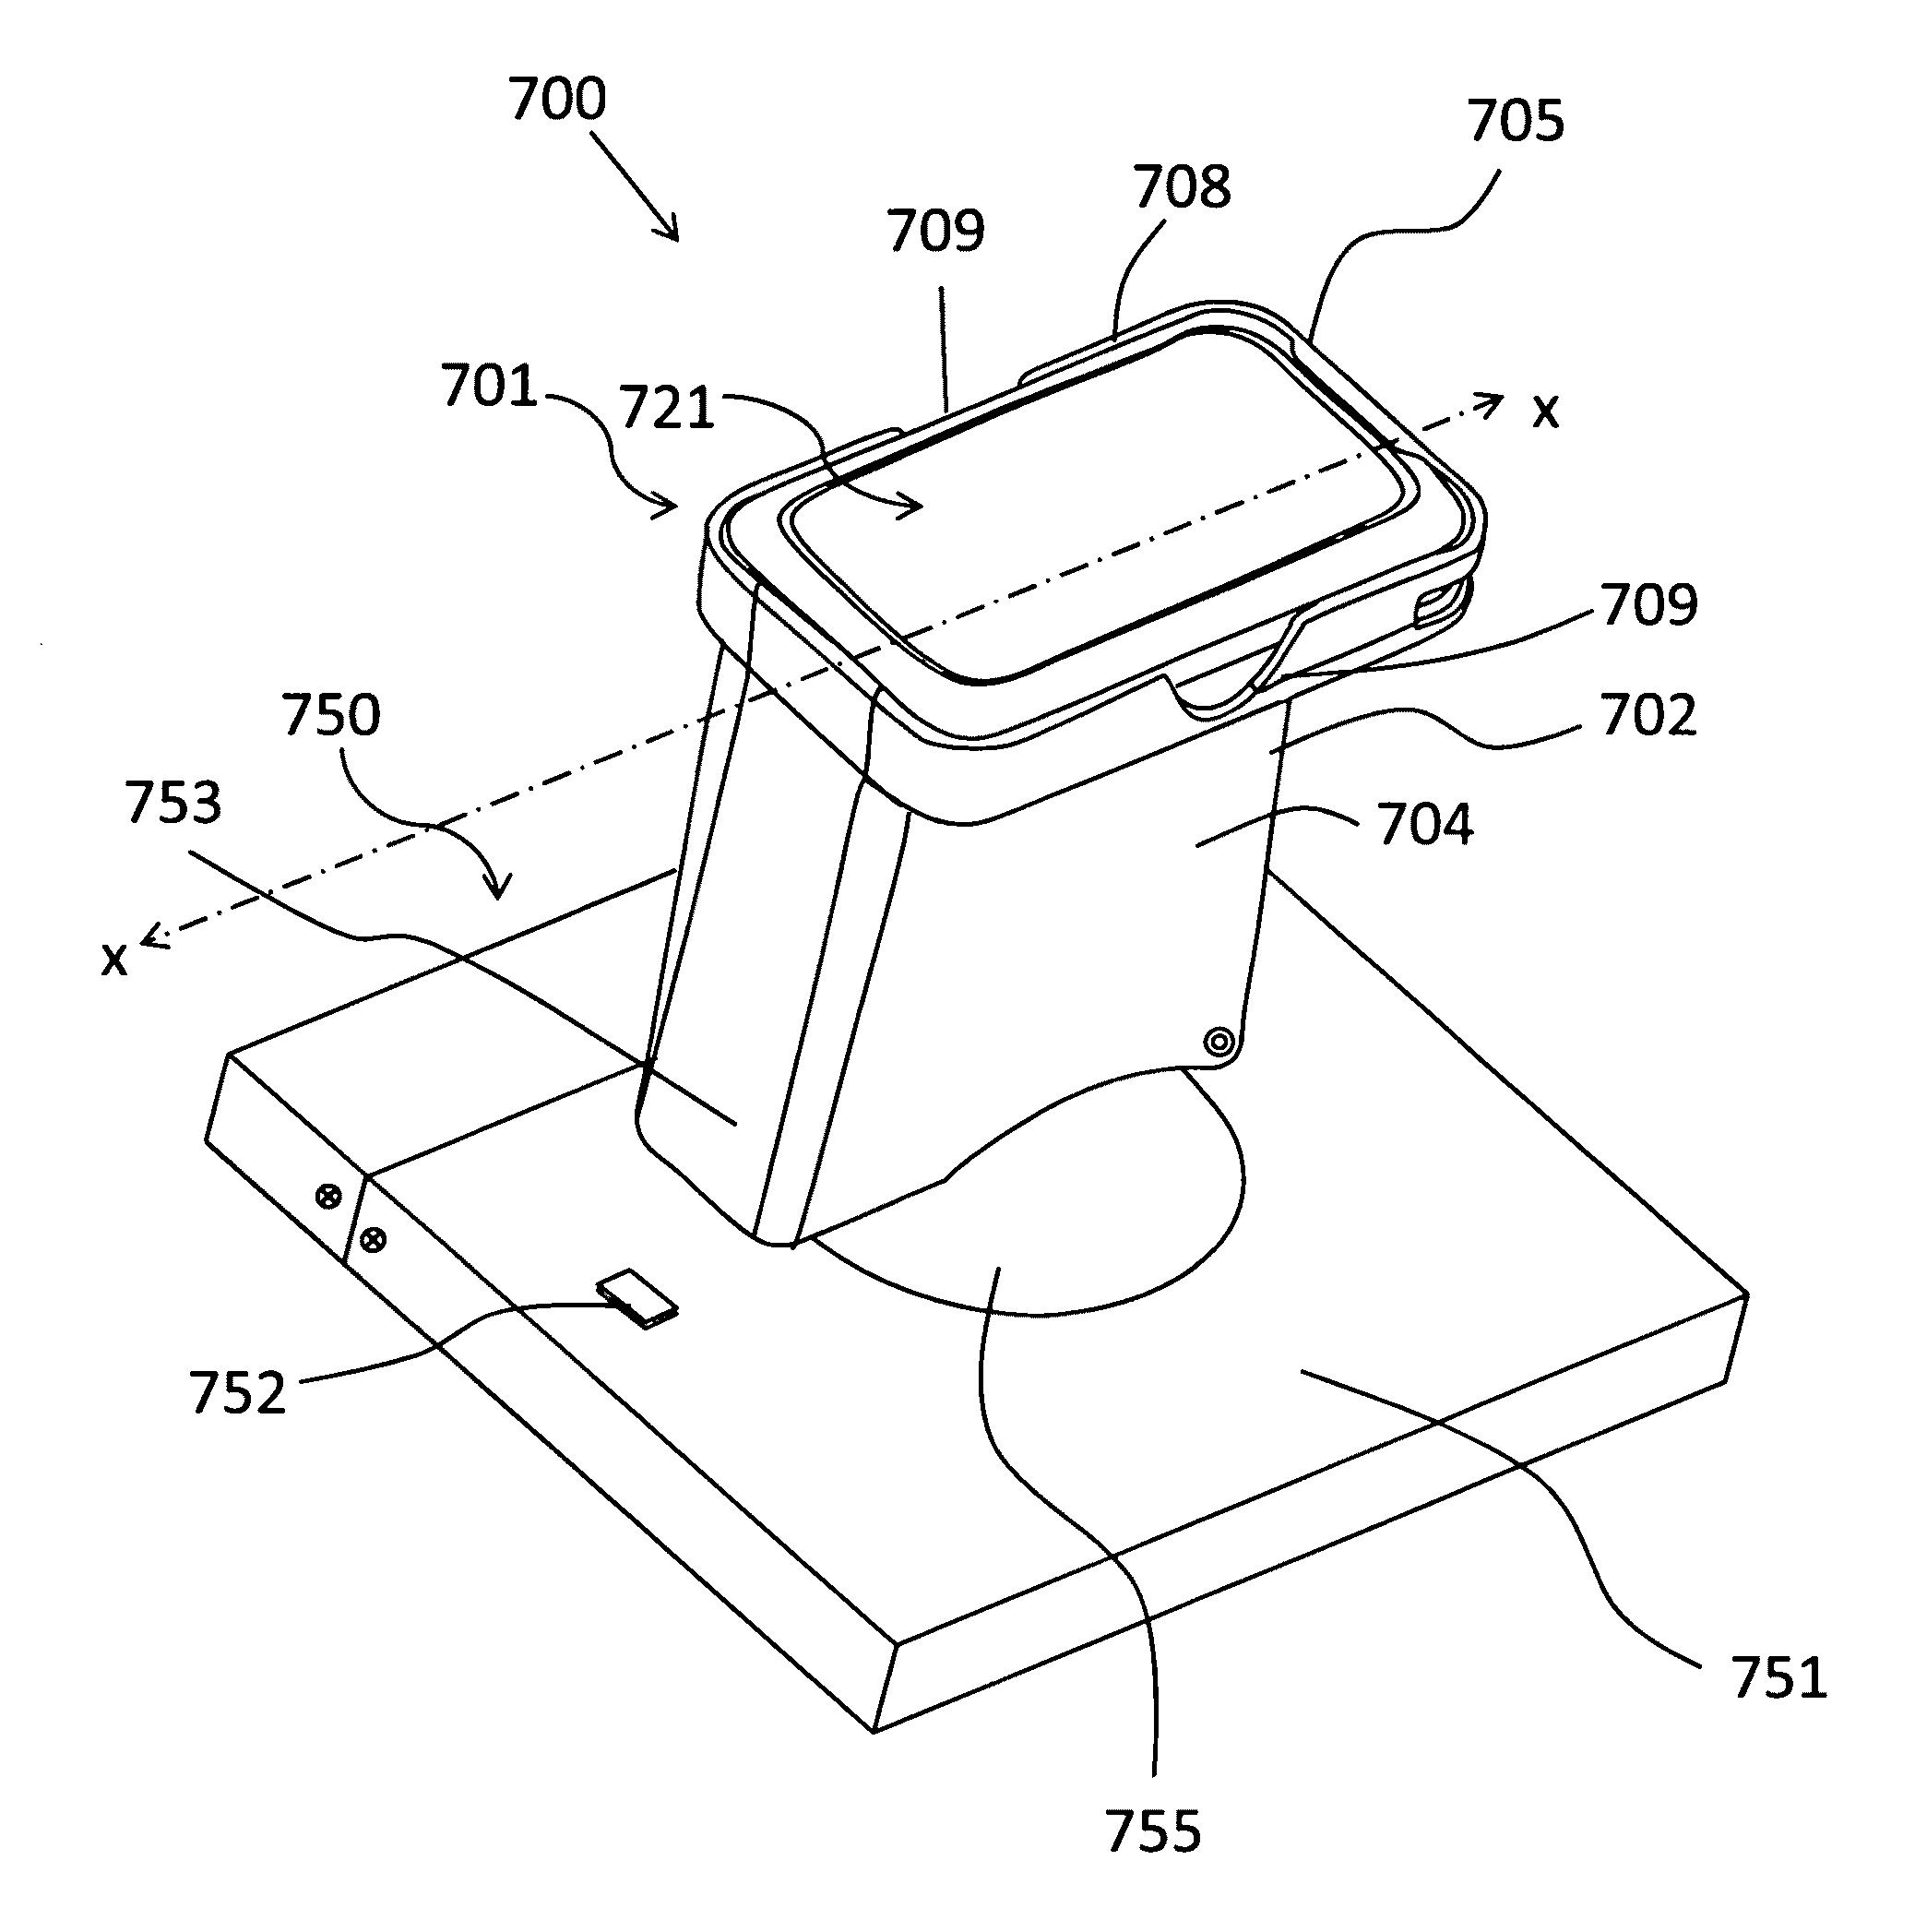 Point of sale (POS) docking station system and method for a mobile barcode scanner gun system with mobile tablet device or stand alone mobile tablet device